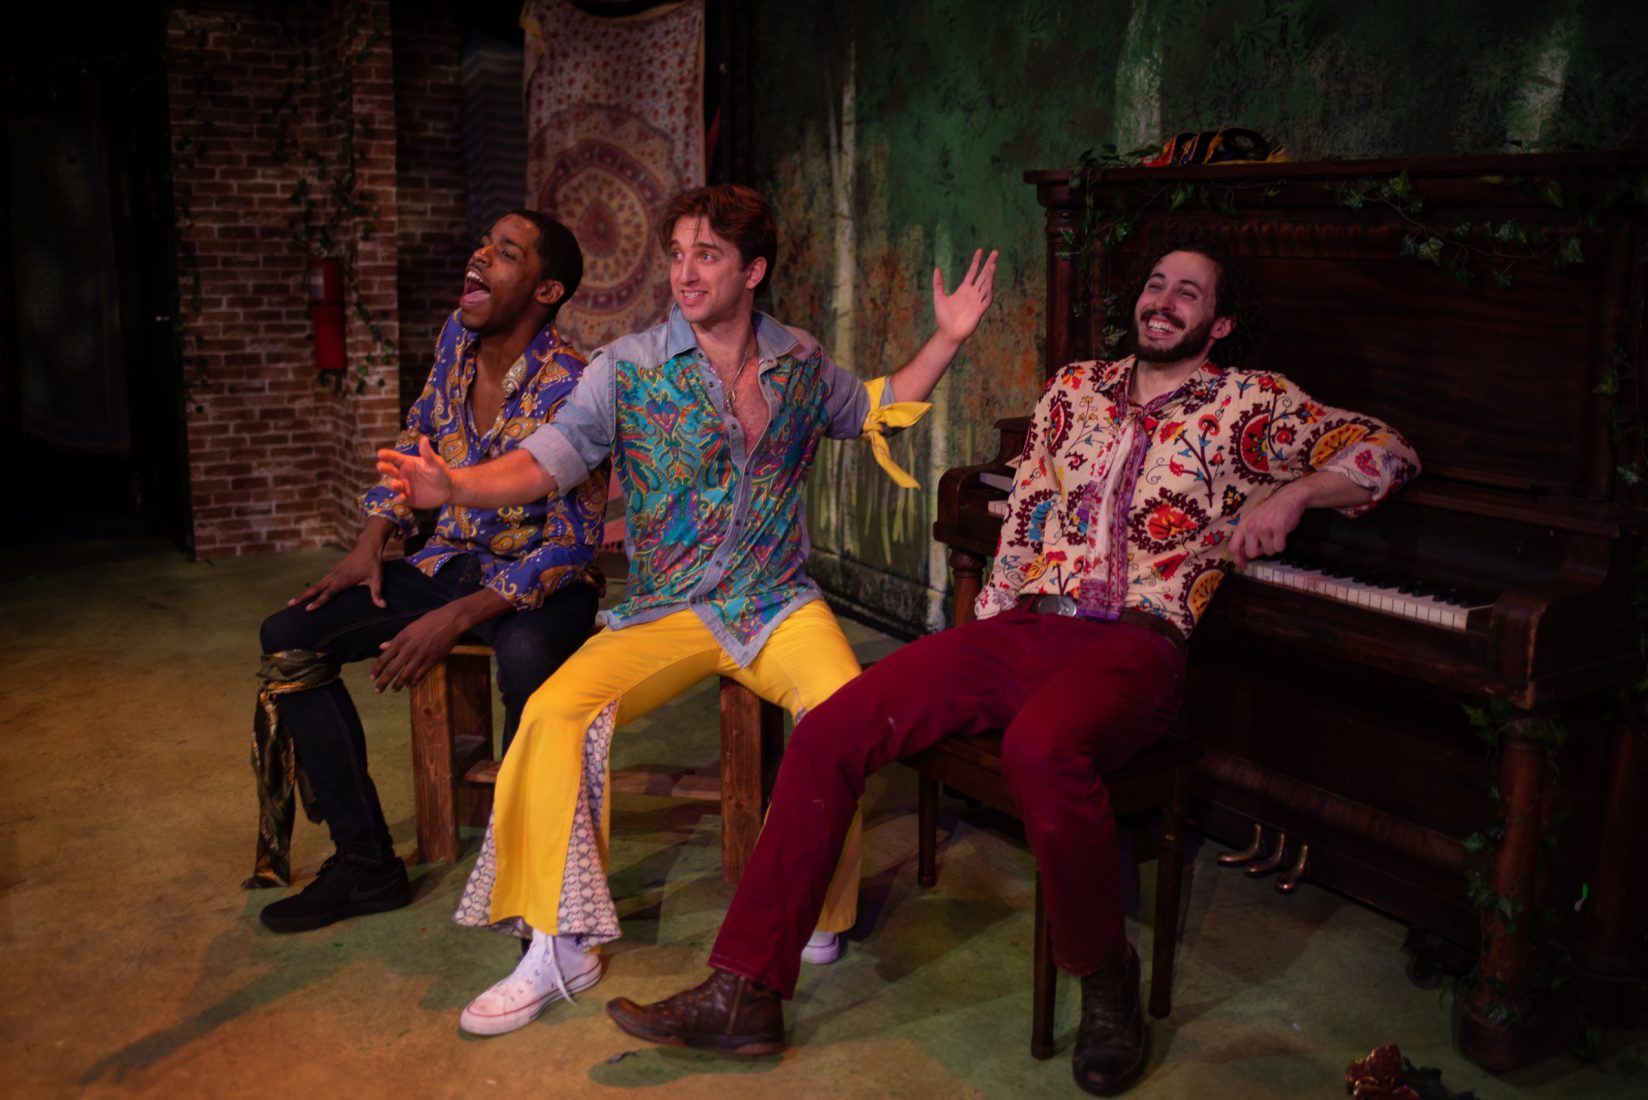 Review: 'Love's Labour's Lost' Wins Laughs in Hippie Lovefest